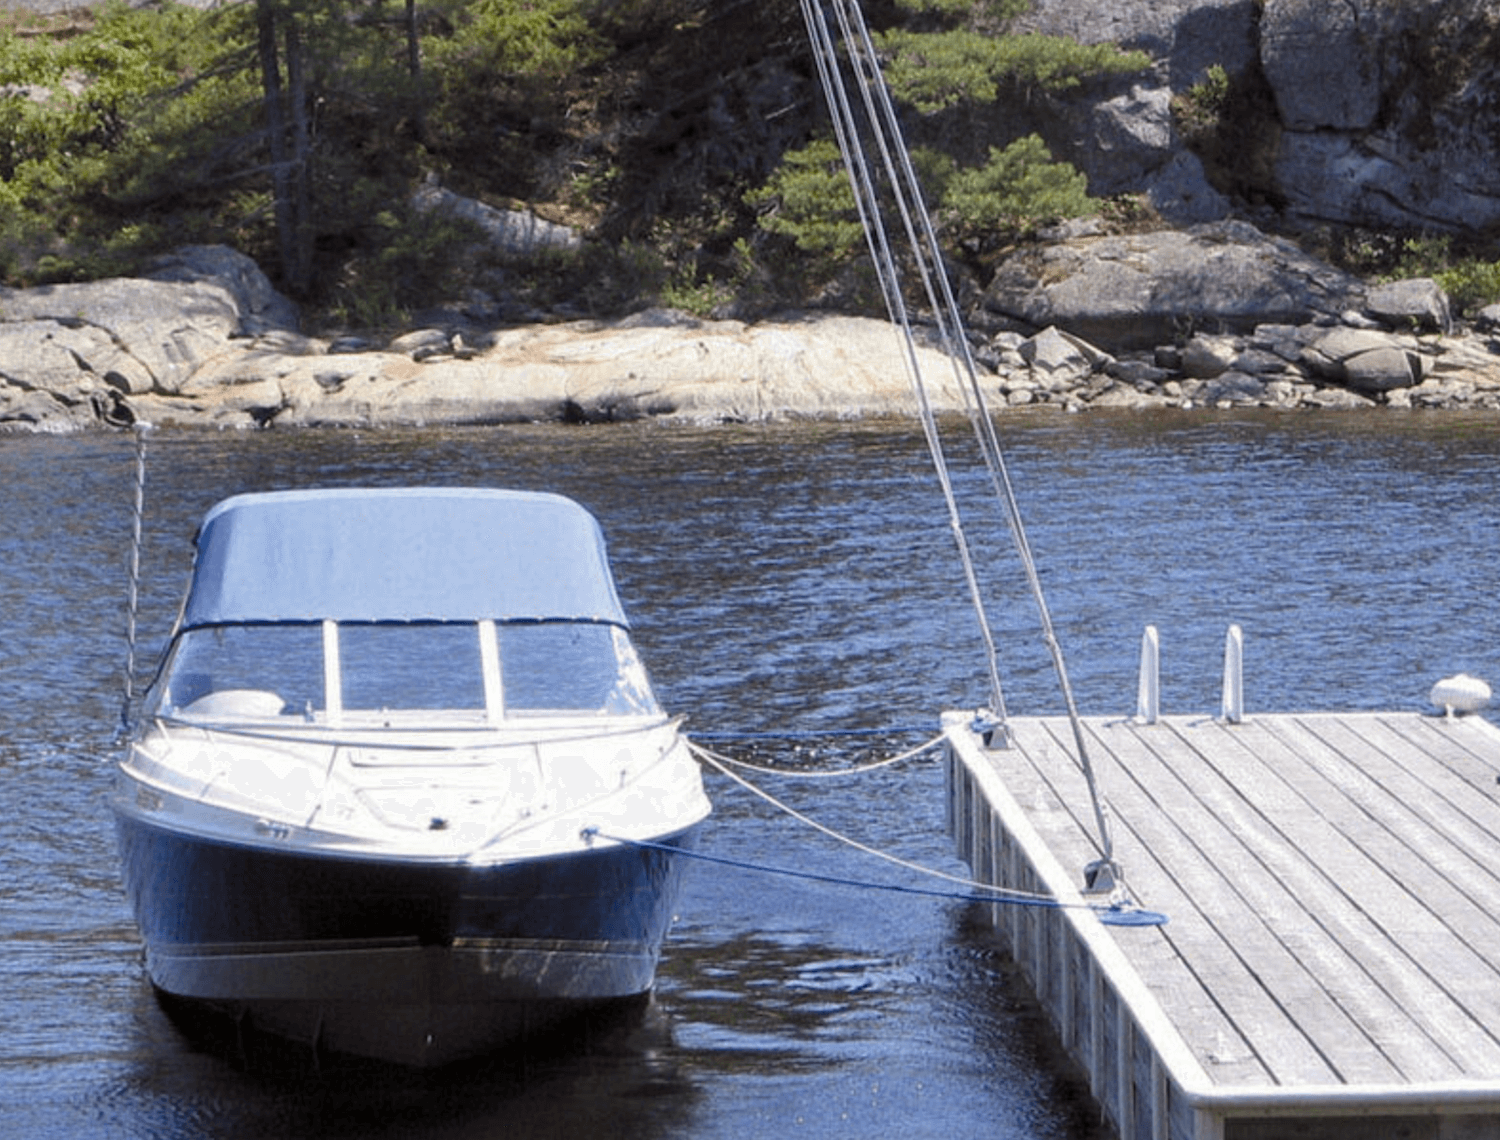 attach-lines-how-to-use-mooring-whips-09-2022 